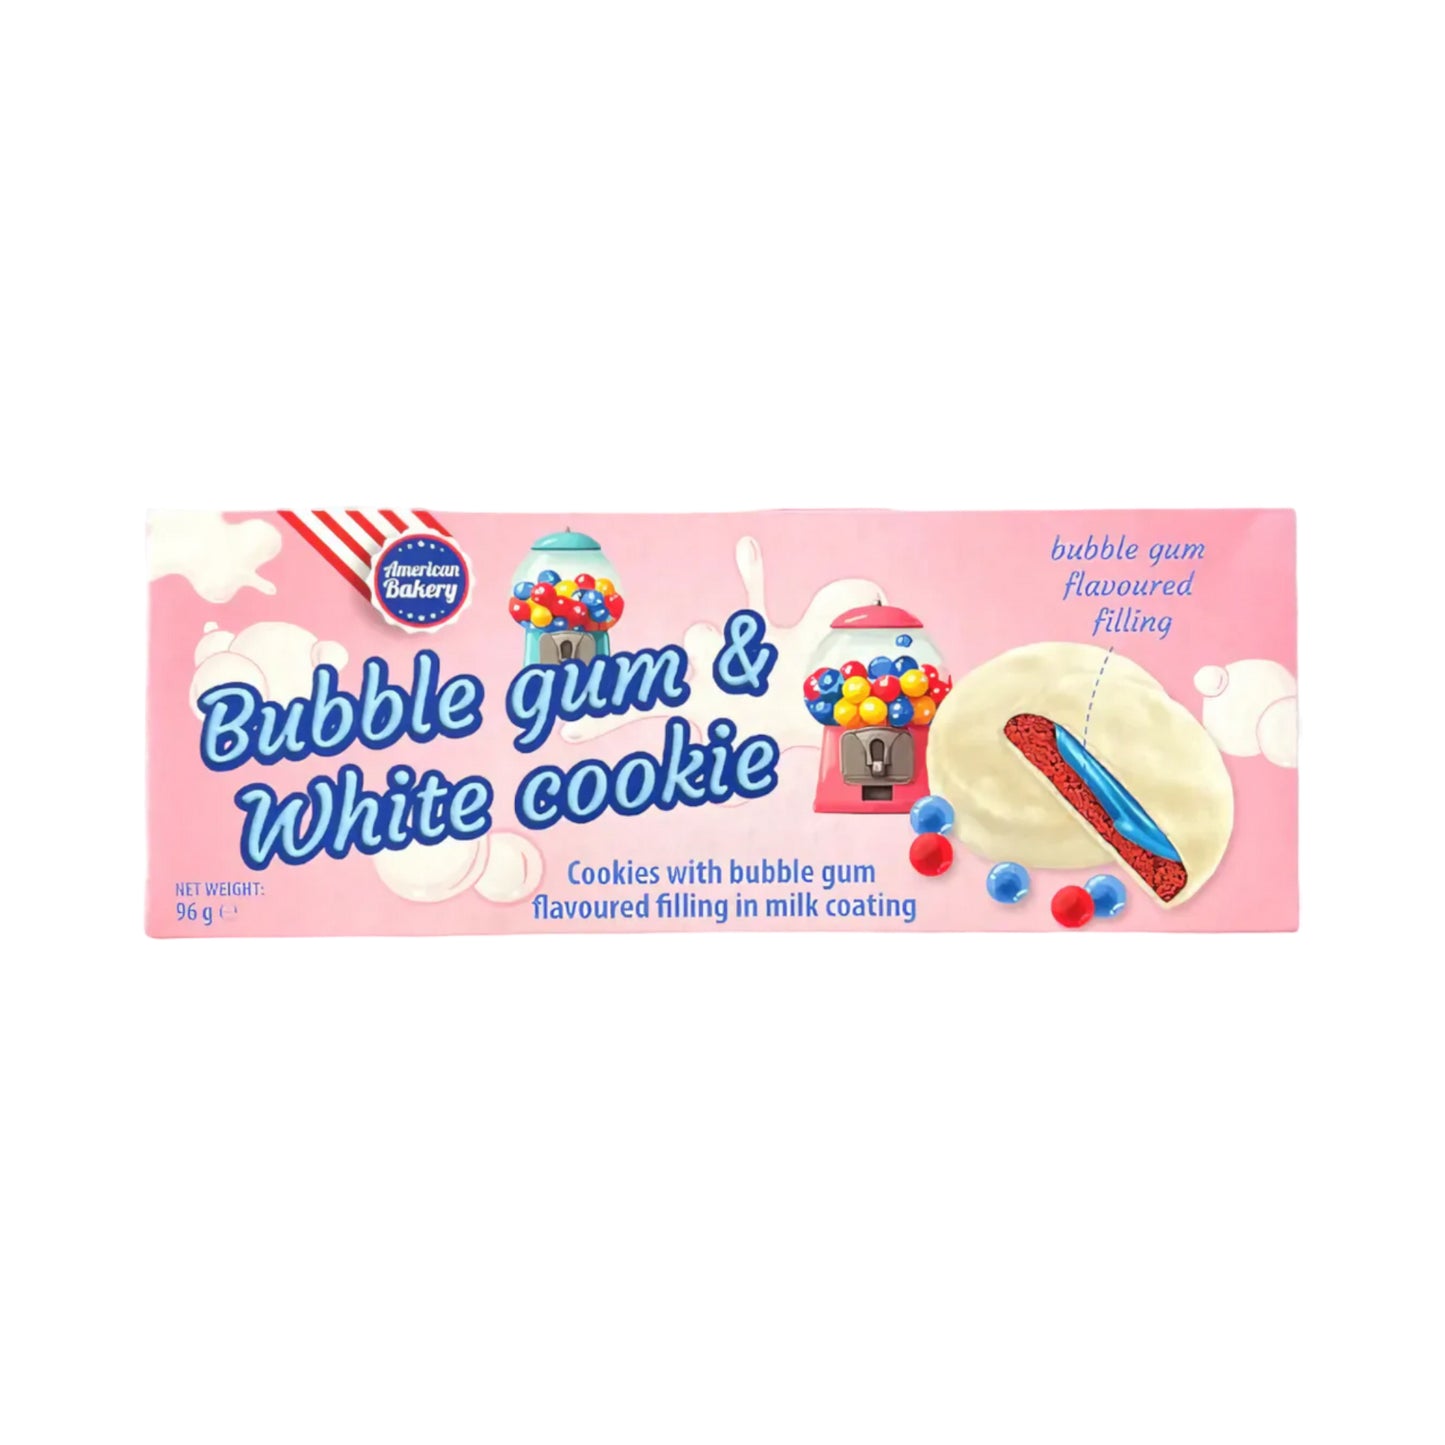 American Bakery Bubble Gum & White Cookie - 96g